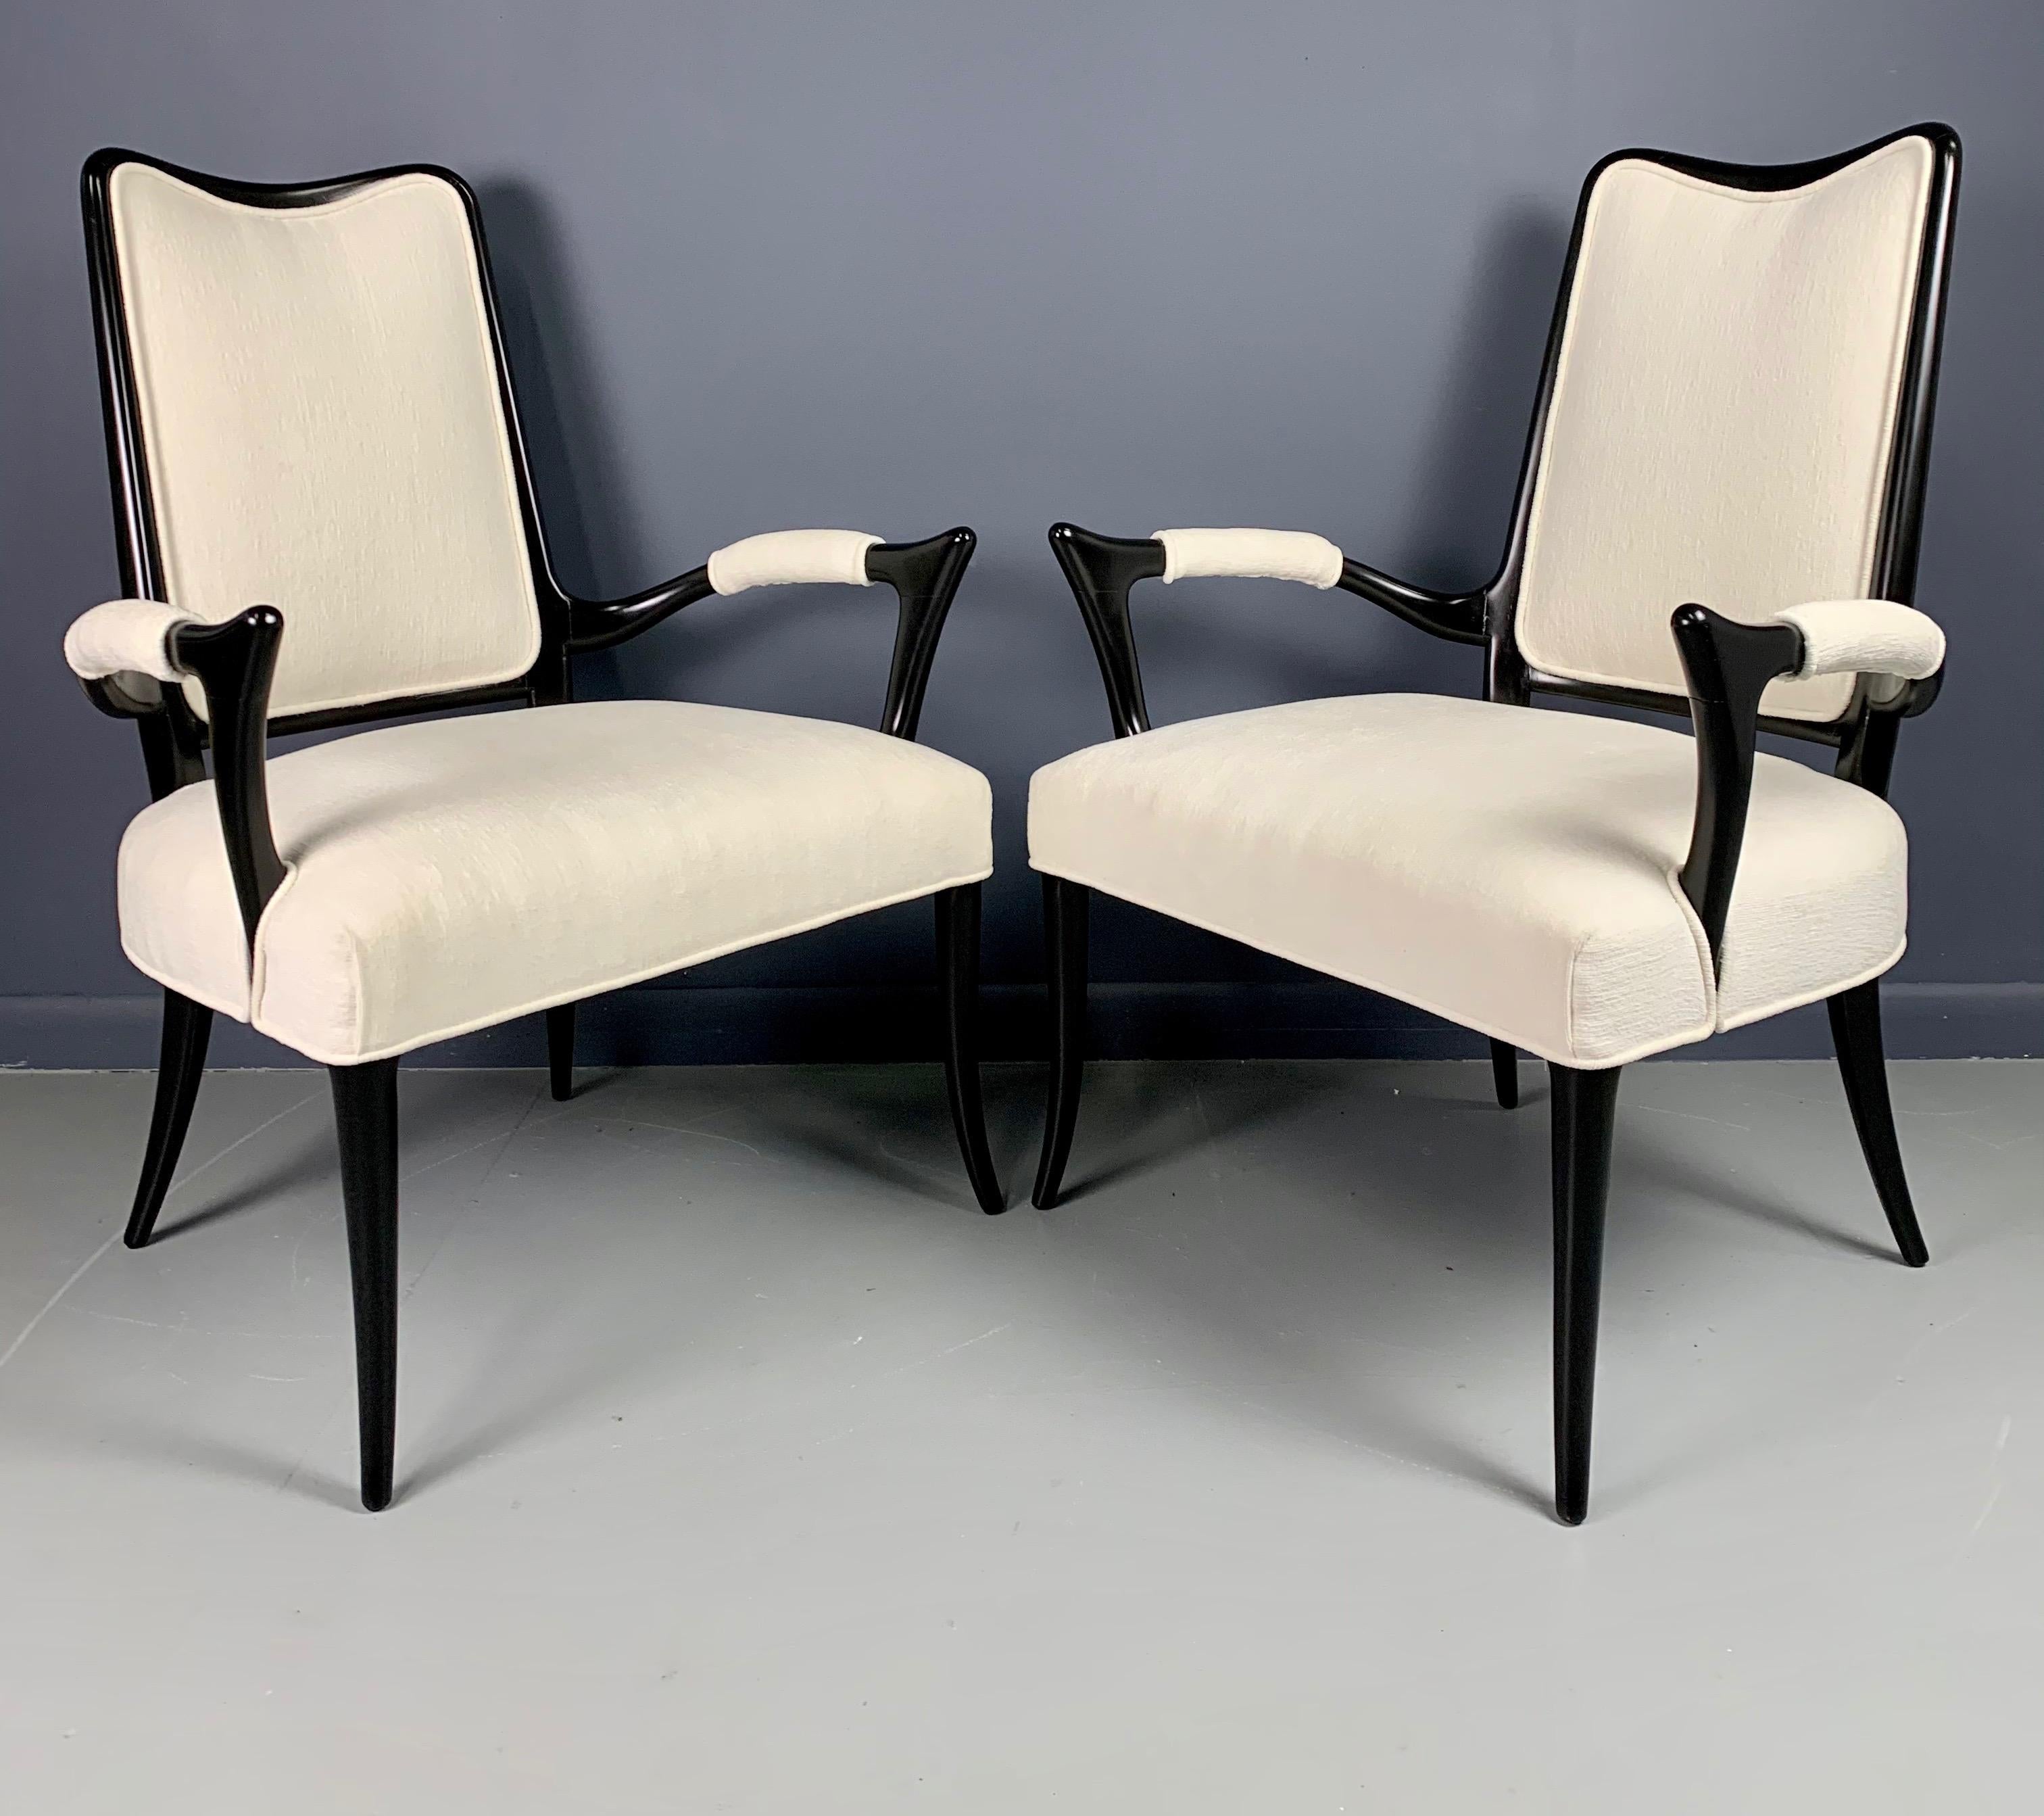 Wonderful and generously sized pair of armchairs with splayed legs and sculptural frame, the back is just a pretty as the front, upholstered in a textured white velvet.